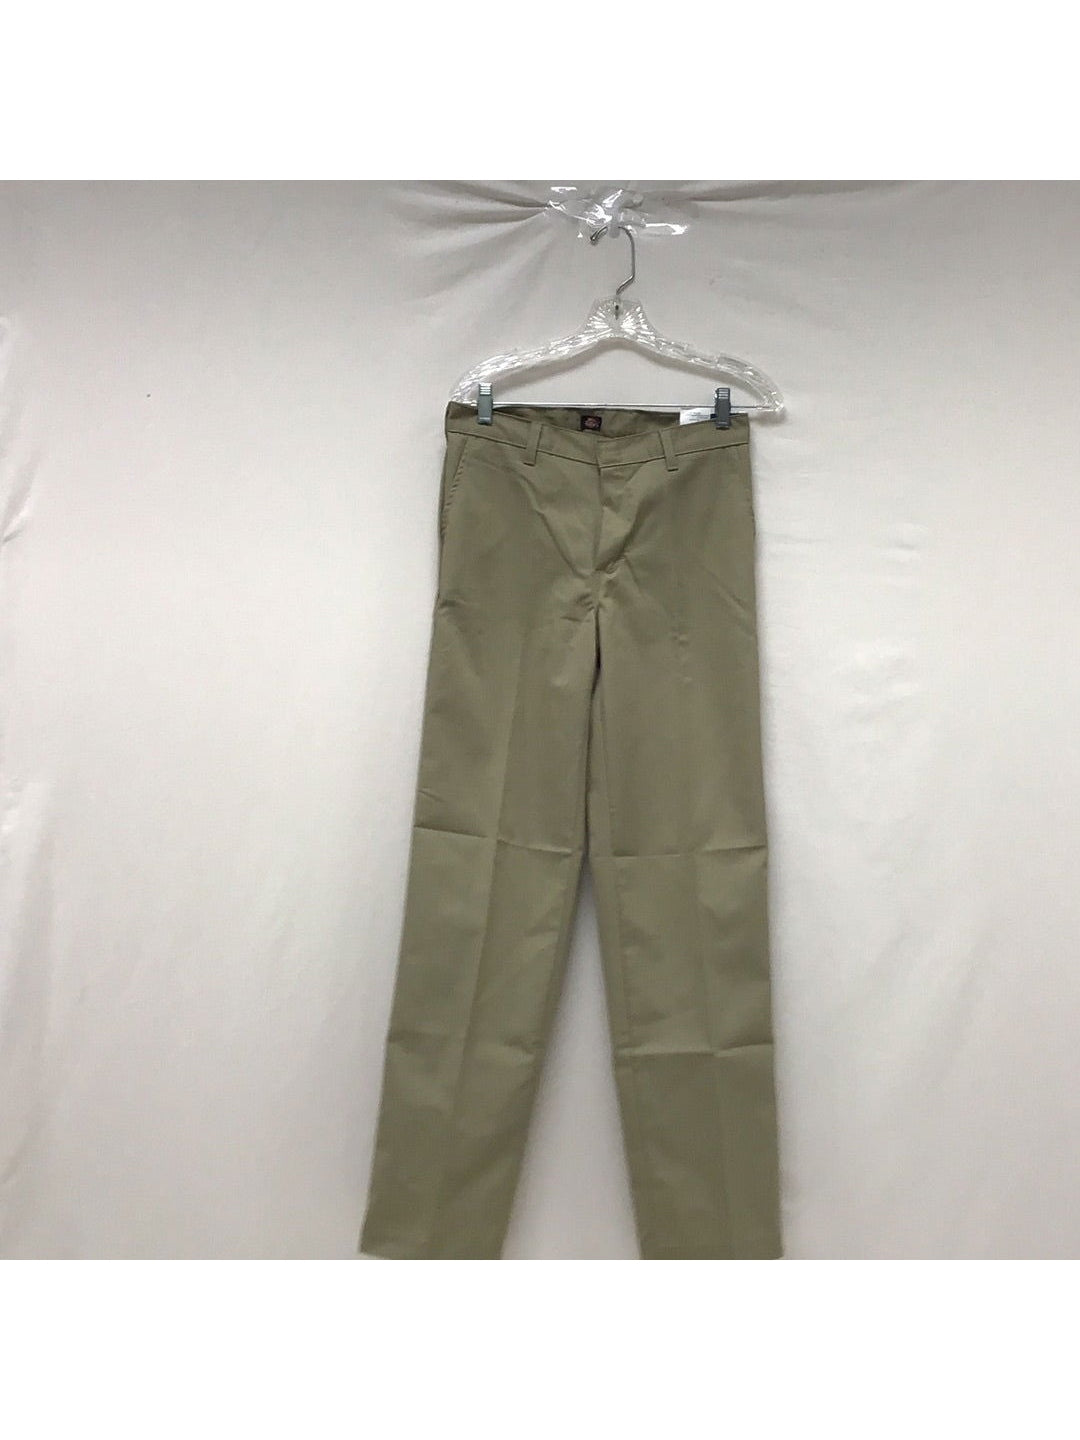 Dickies Boy Tan Carpenter Work   Canvas pants - The Kennedy Collective Thrift - 